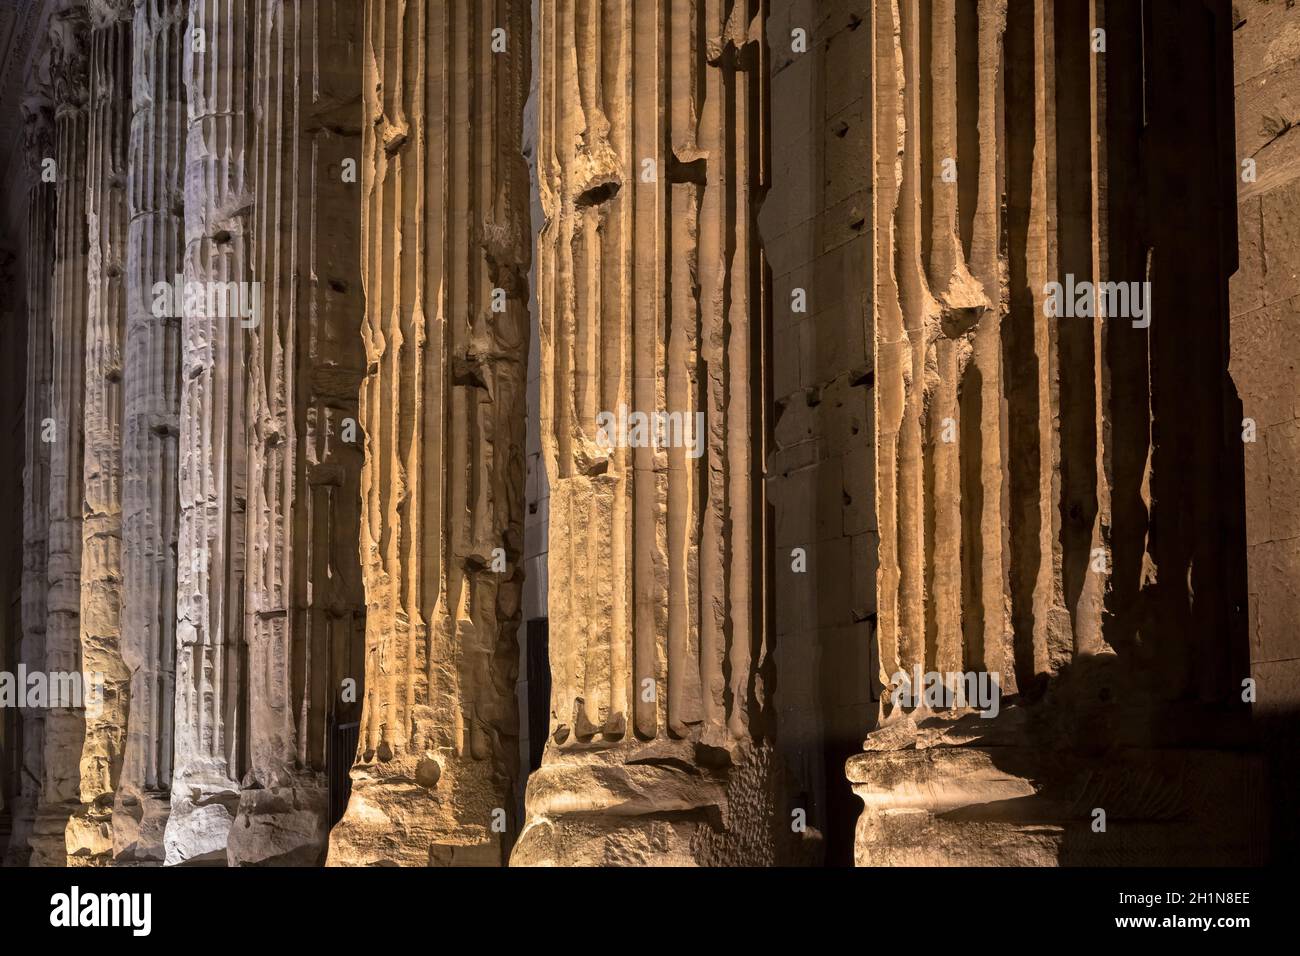 Rome, Italy. Detail of illuminated column architecture of Pantheon by night. Useful as archaeology background. Stock Photo